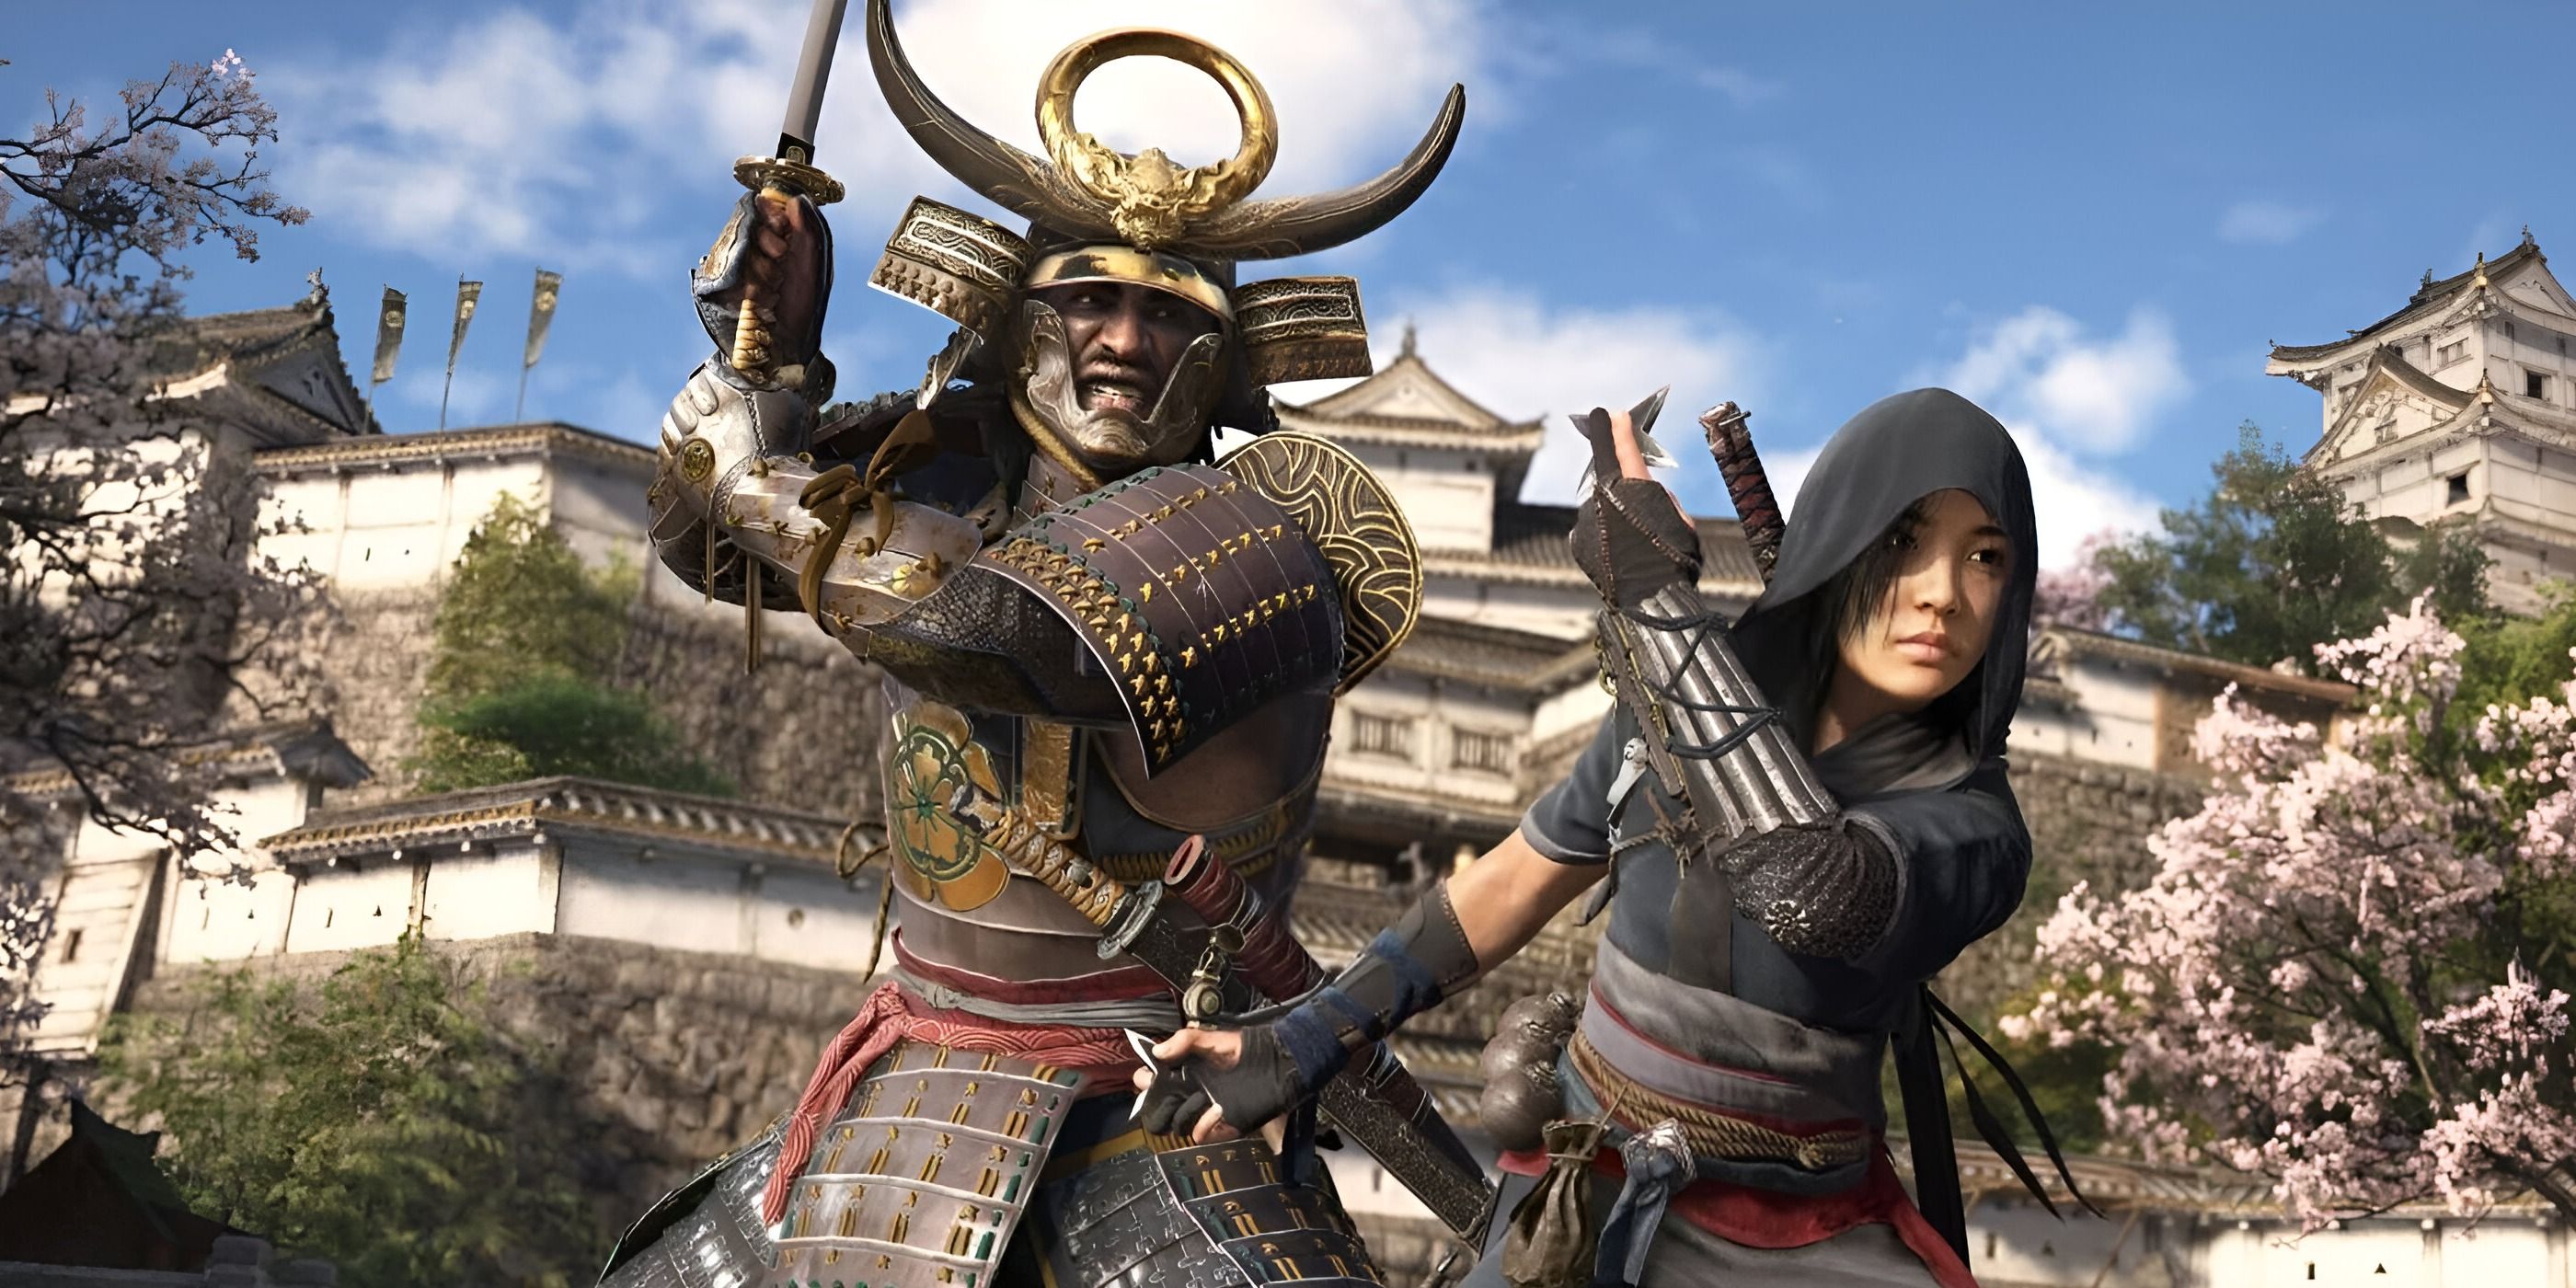 assassin creed shadows yasuke and naeo in combat position